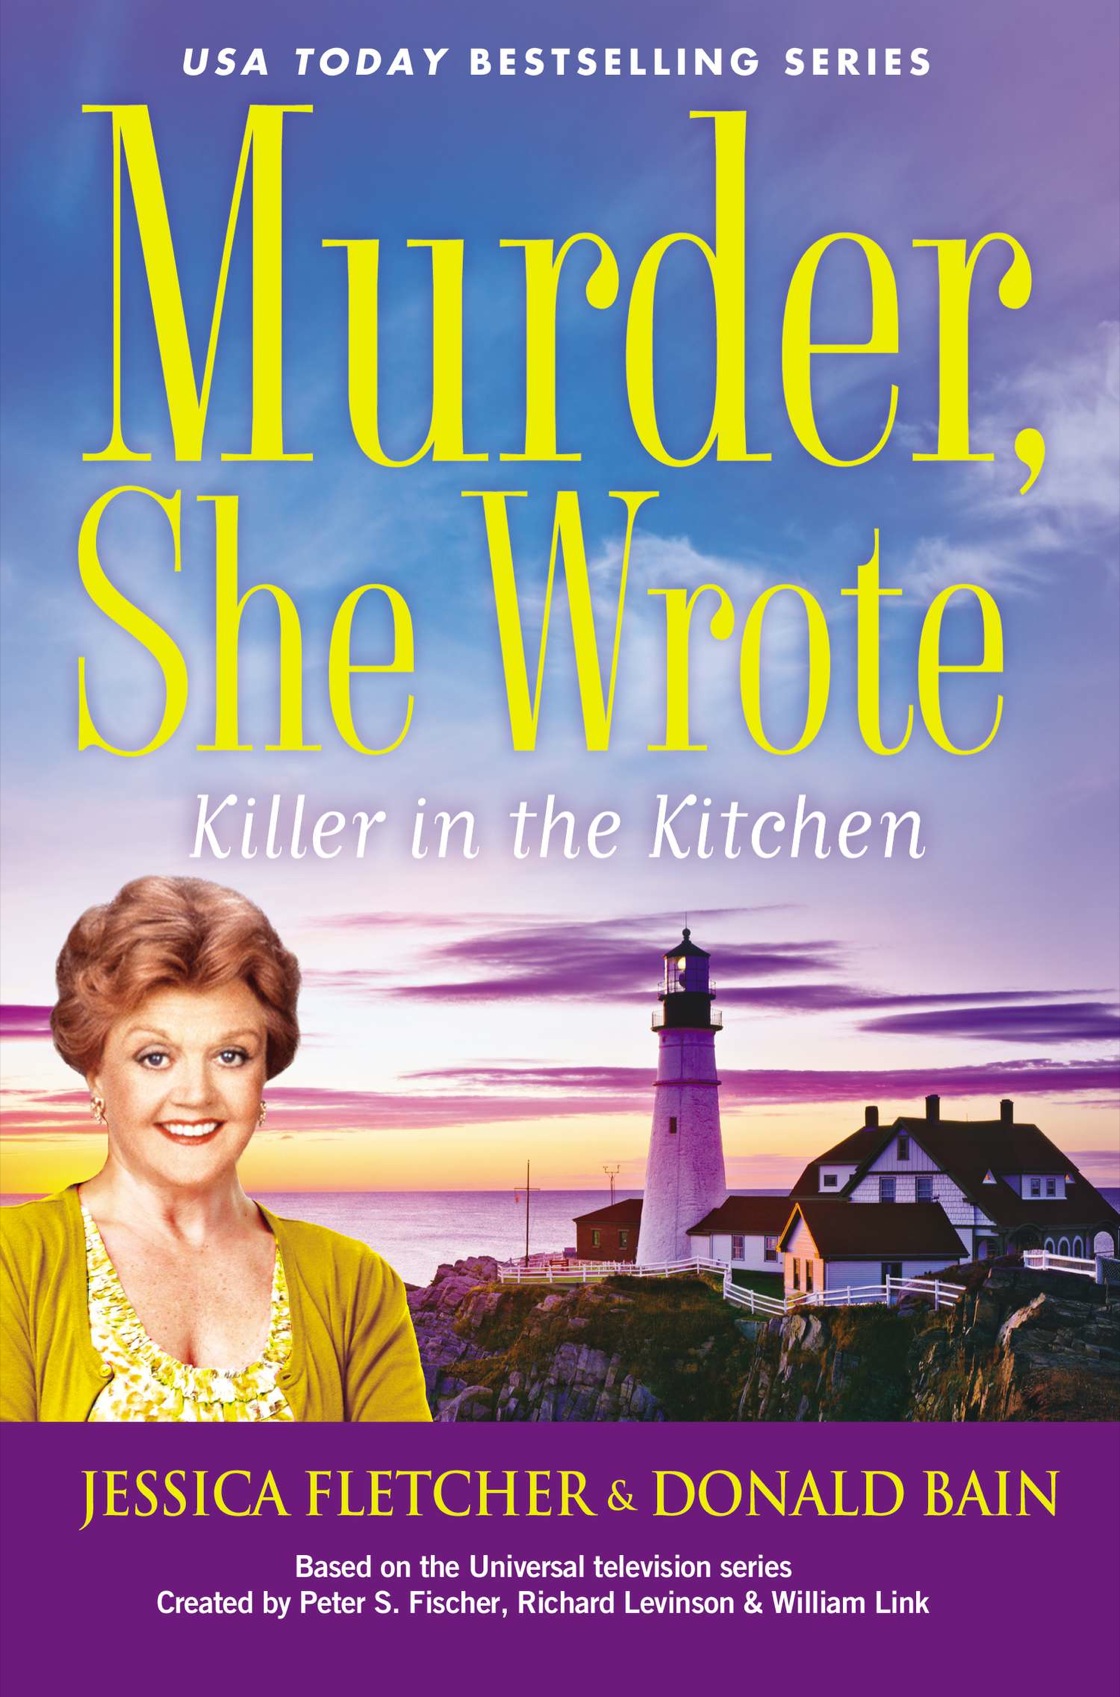 Killer in the Kitchen (2015) by Donald Bain